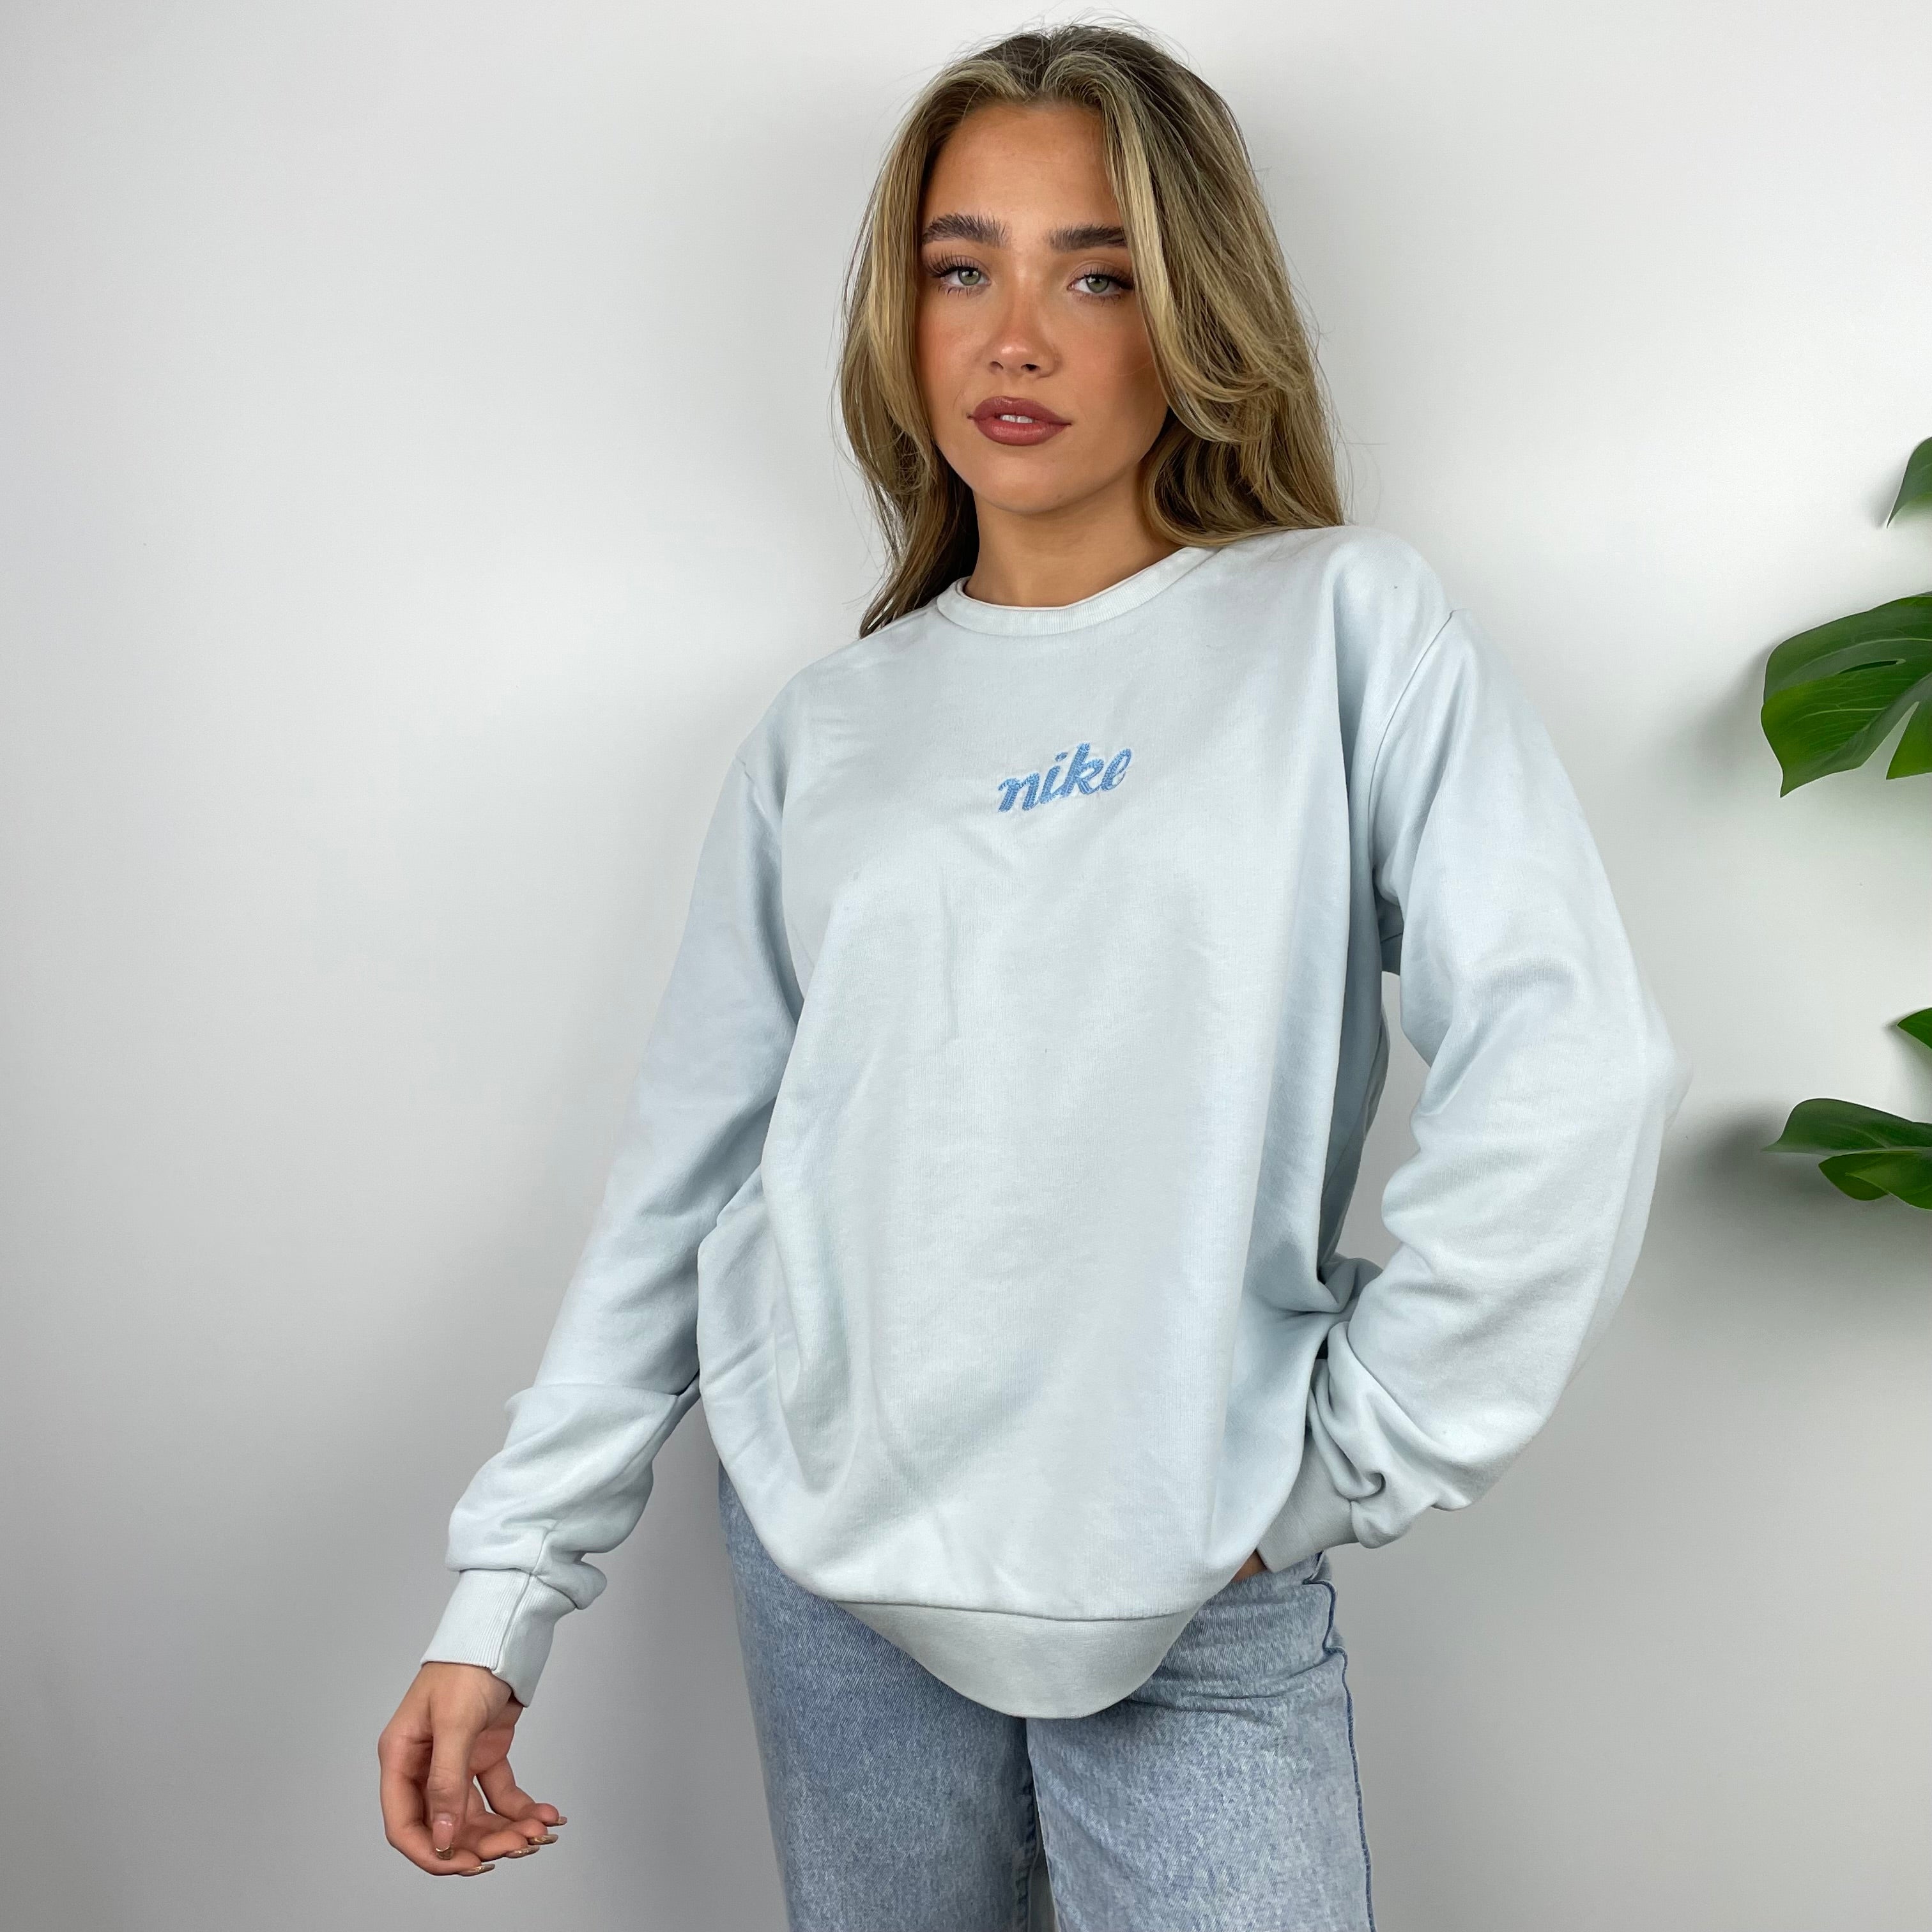 Nike RARE Baby Blue Embroidered Spell Out Sweatshirt (M)